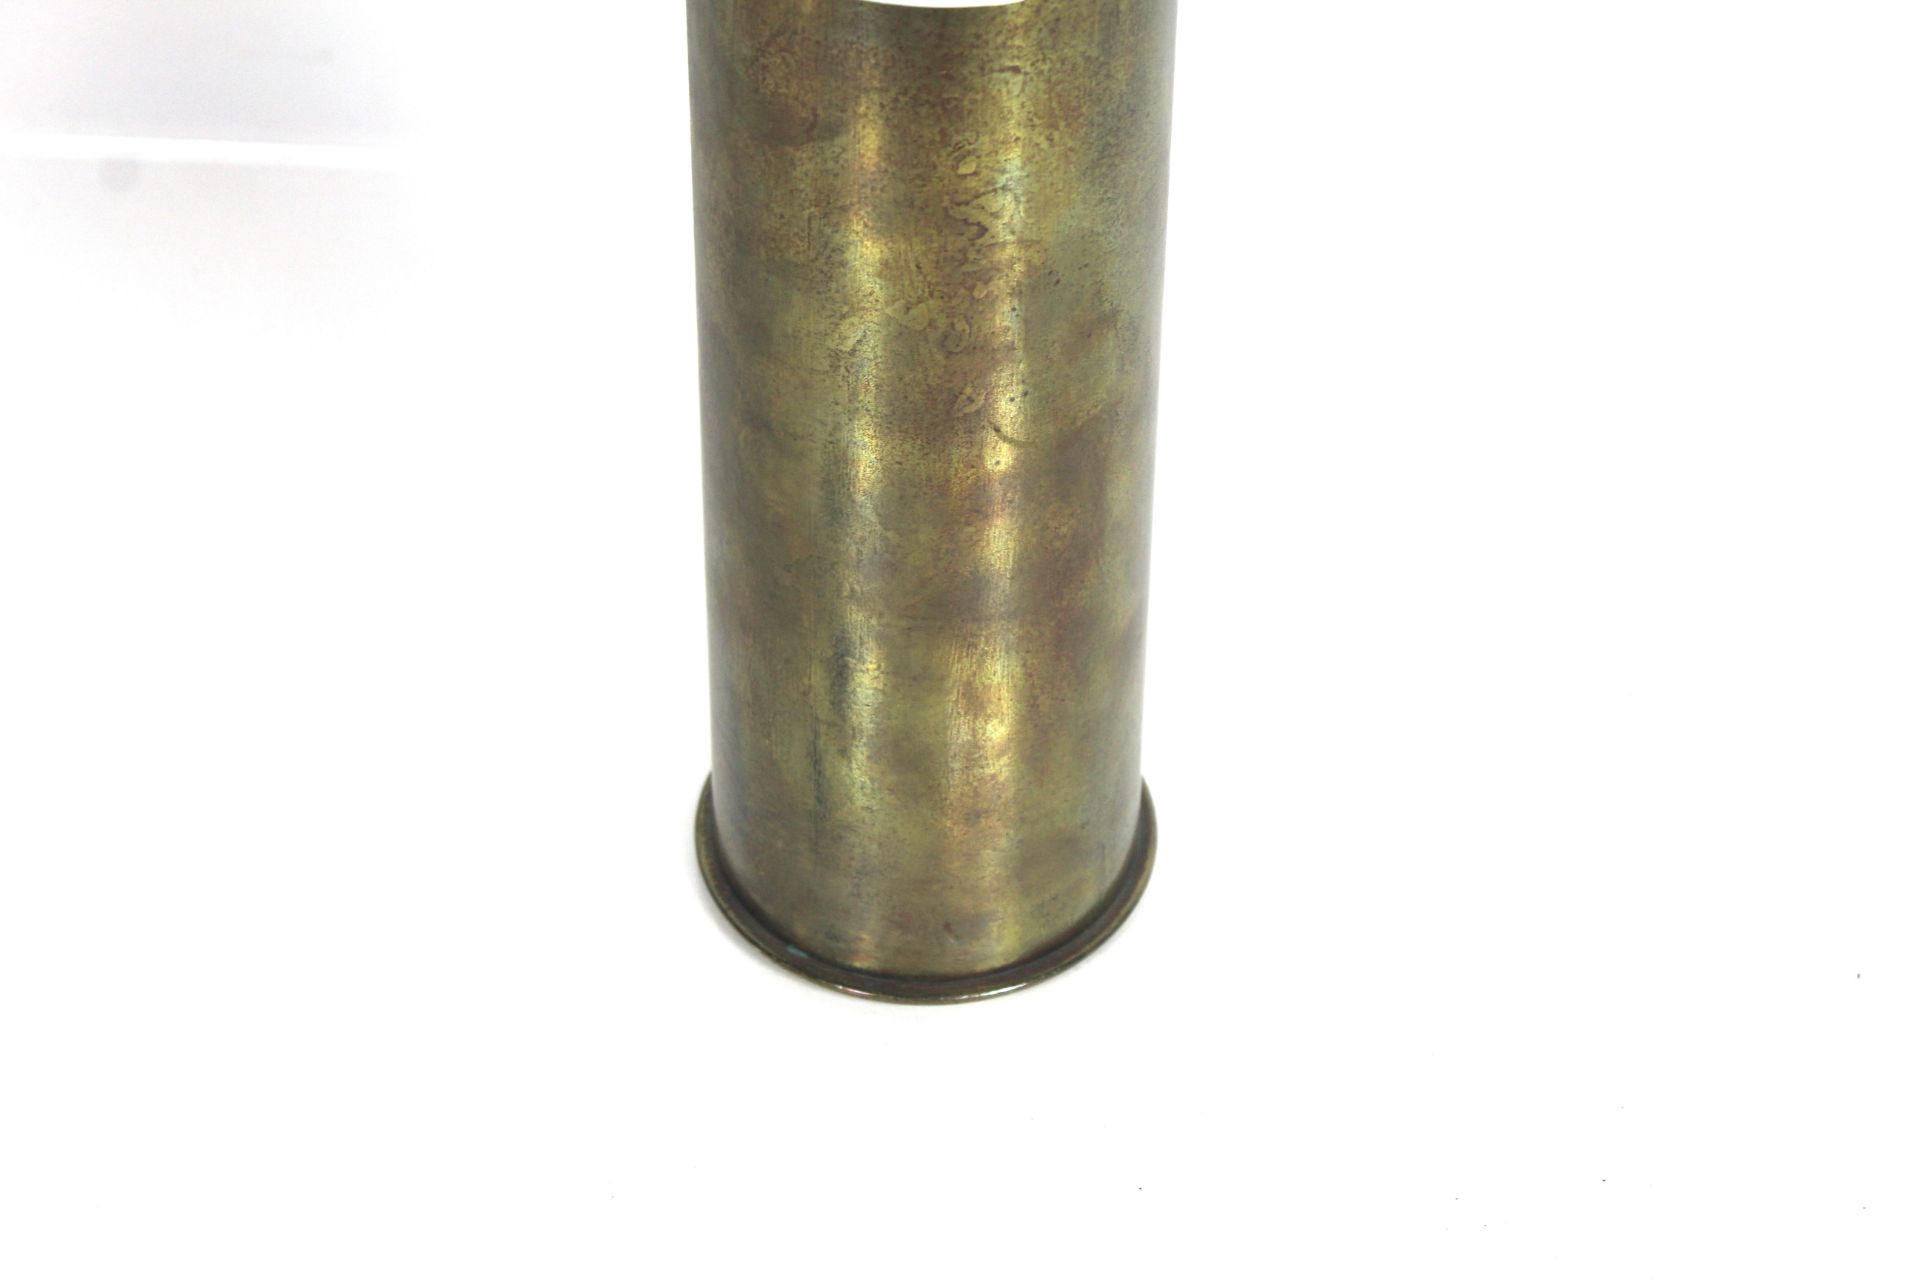 A 1906 dated German brass shell case approx. 15" i - Image 3 of 6